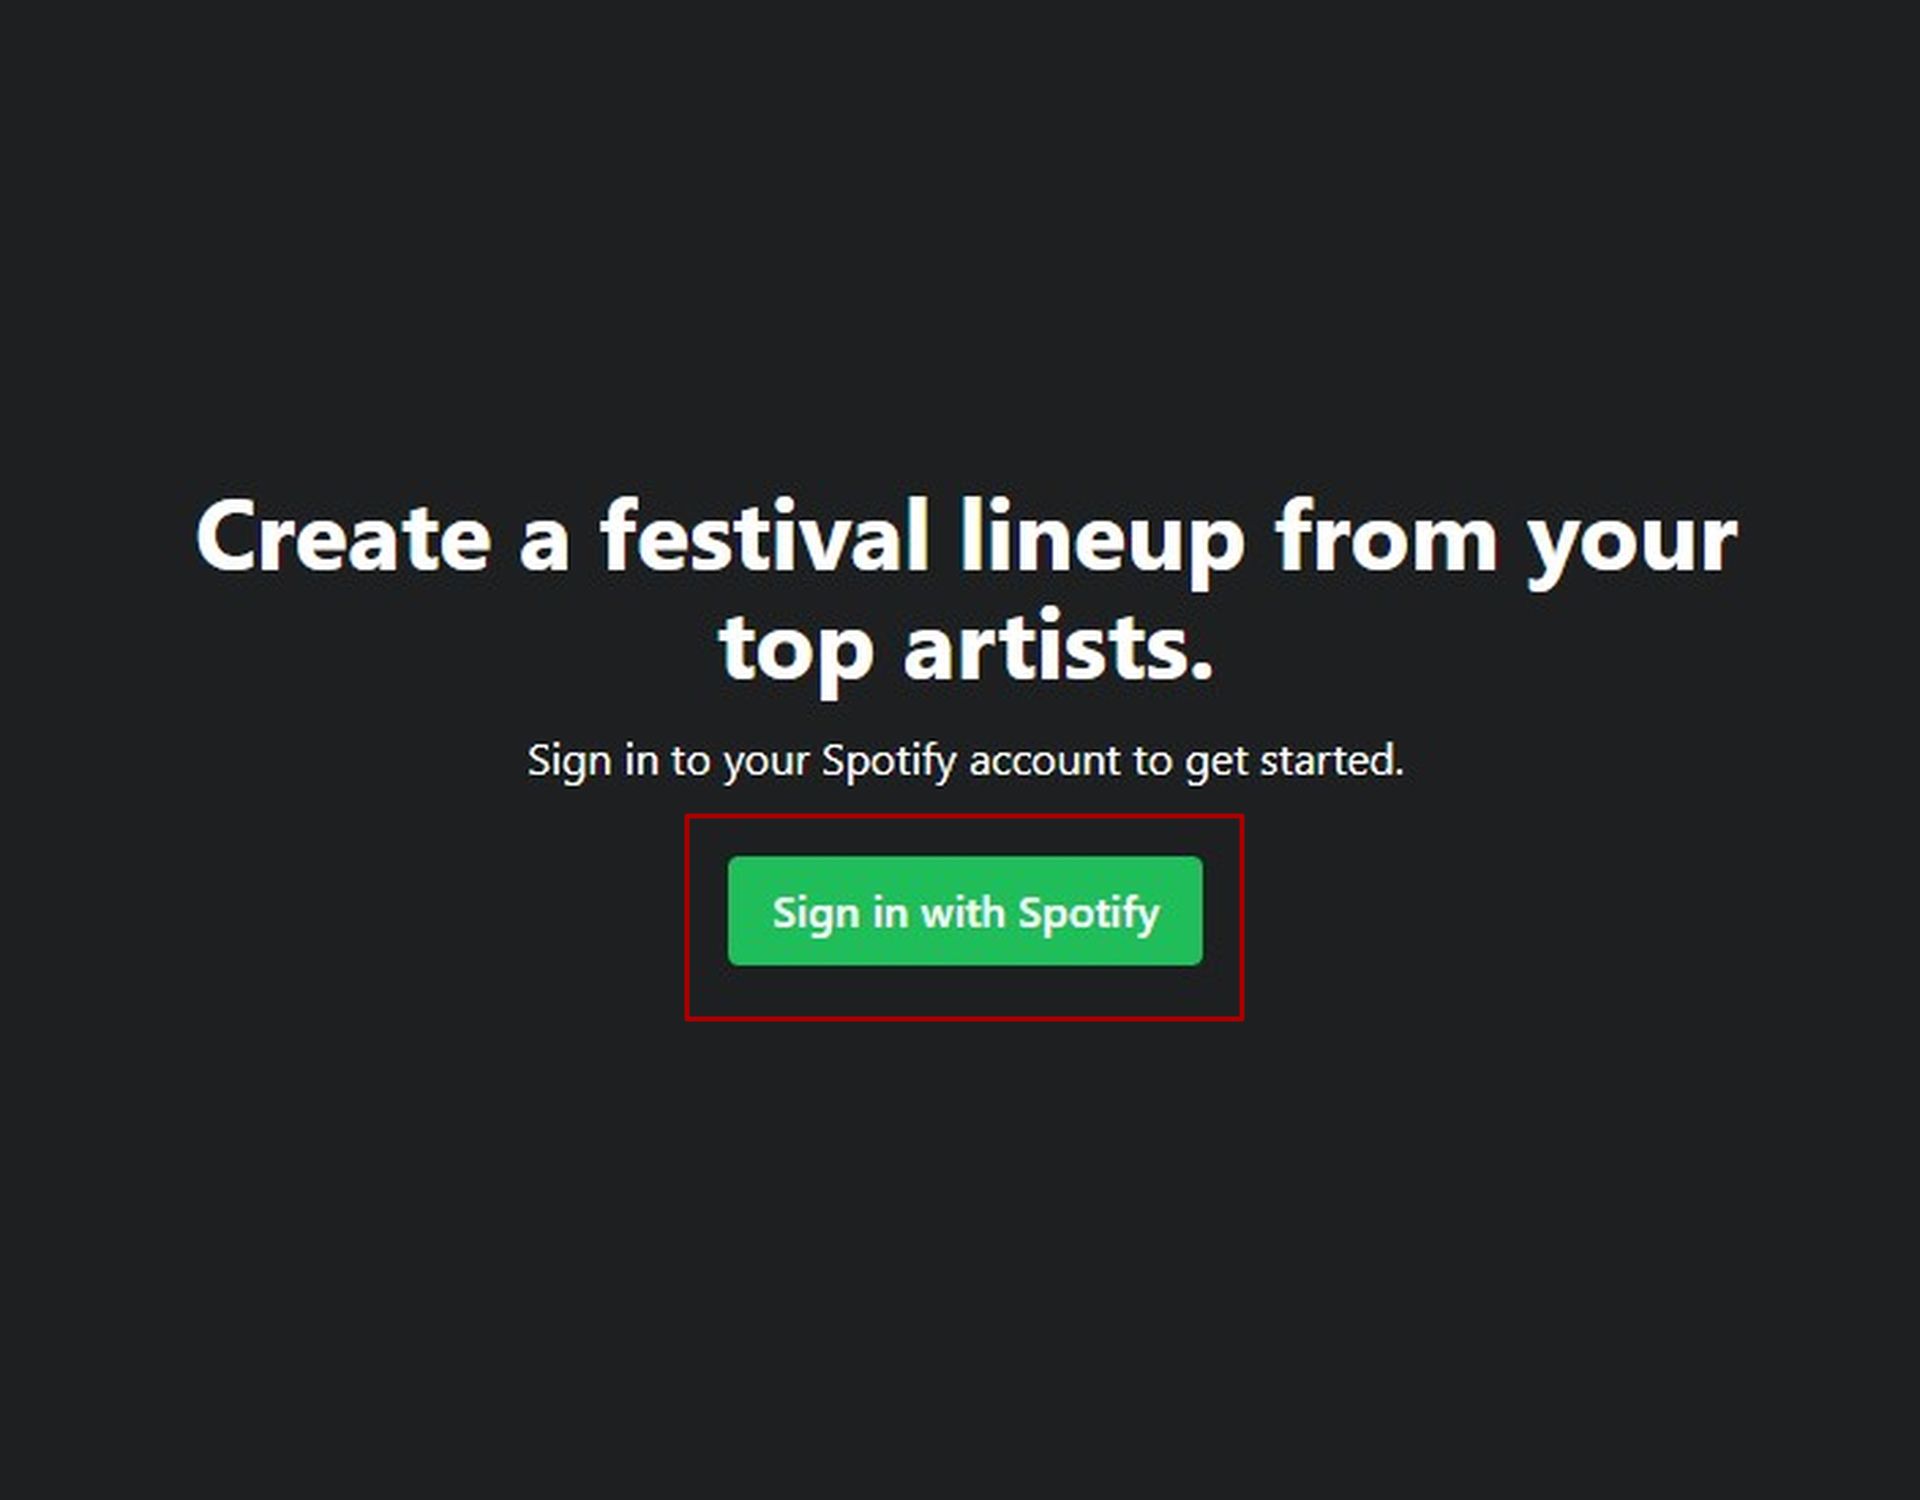 All you have to do to create your own Spotify Festival Lineup is to click the Sign in with Spotify button at Instafest 2022 app